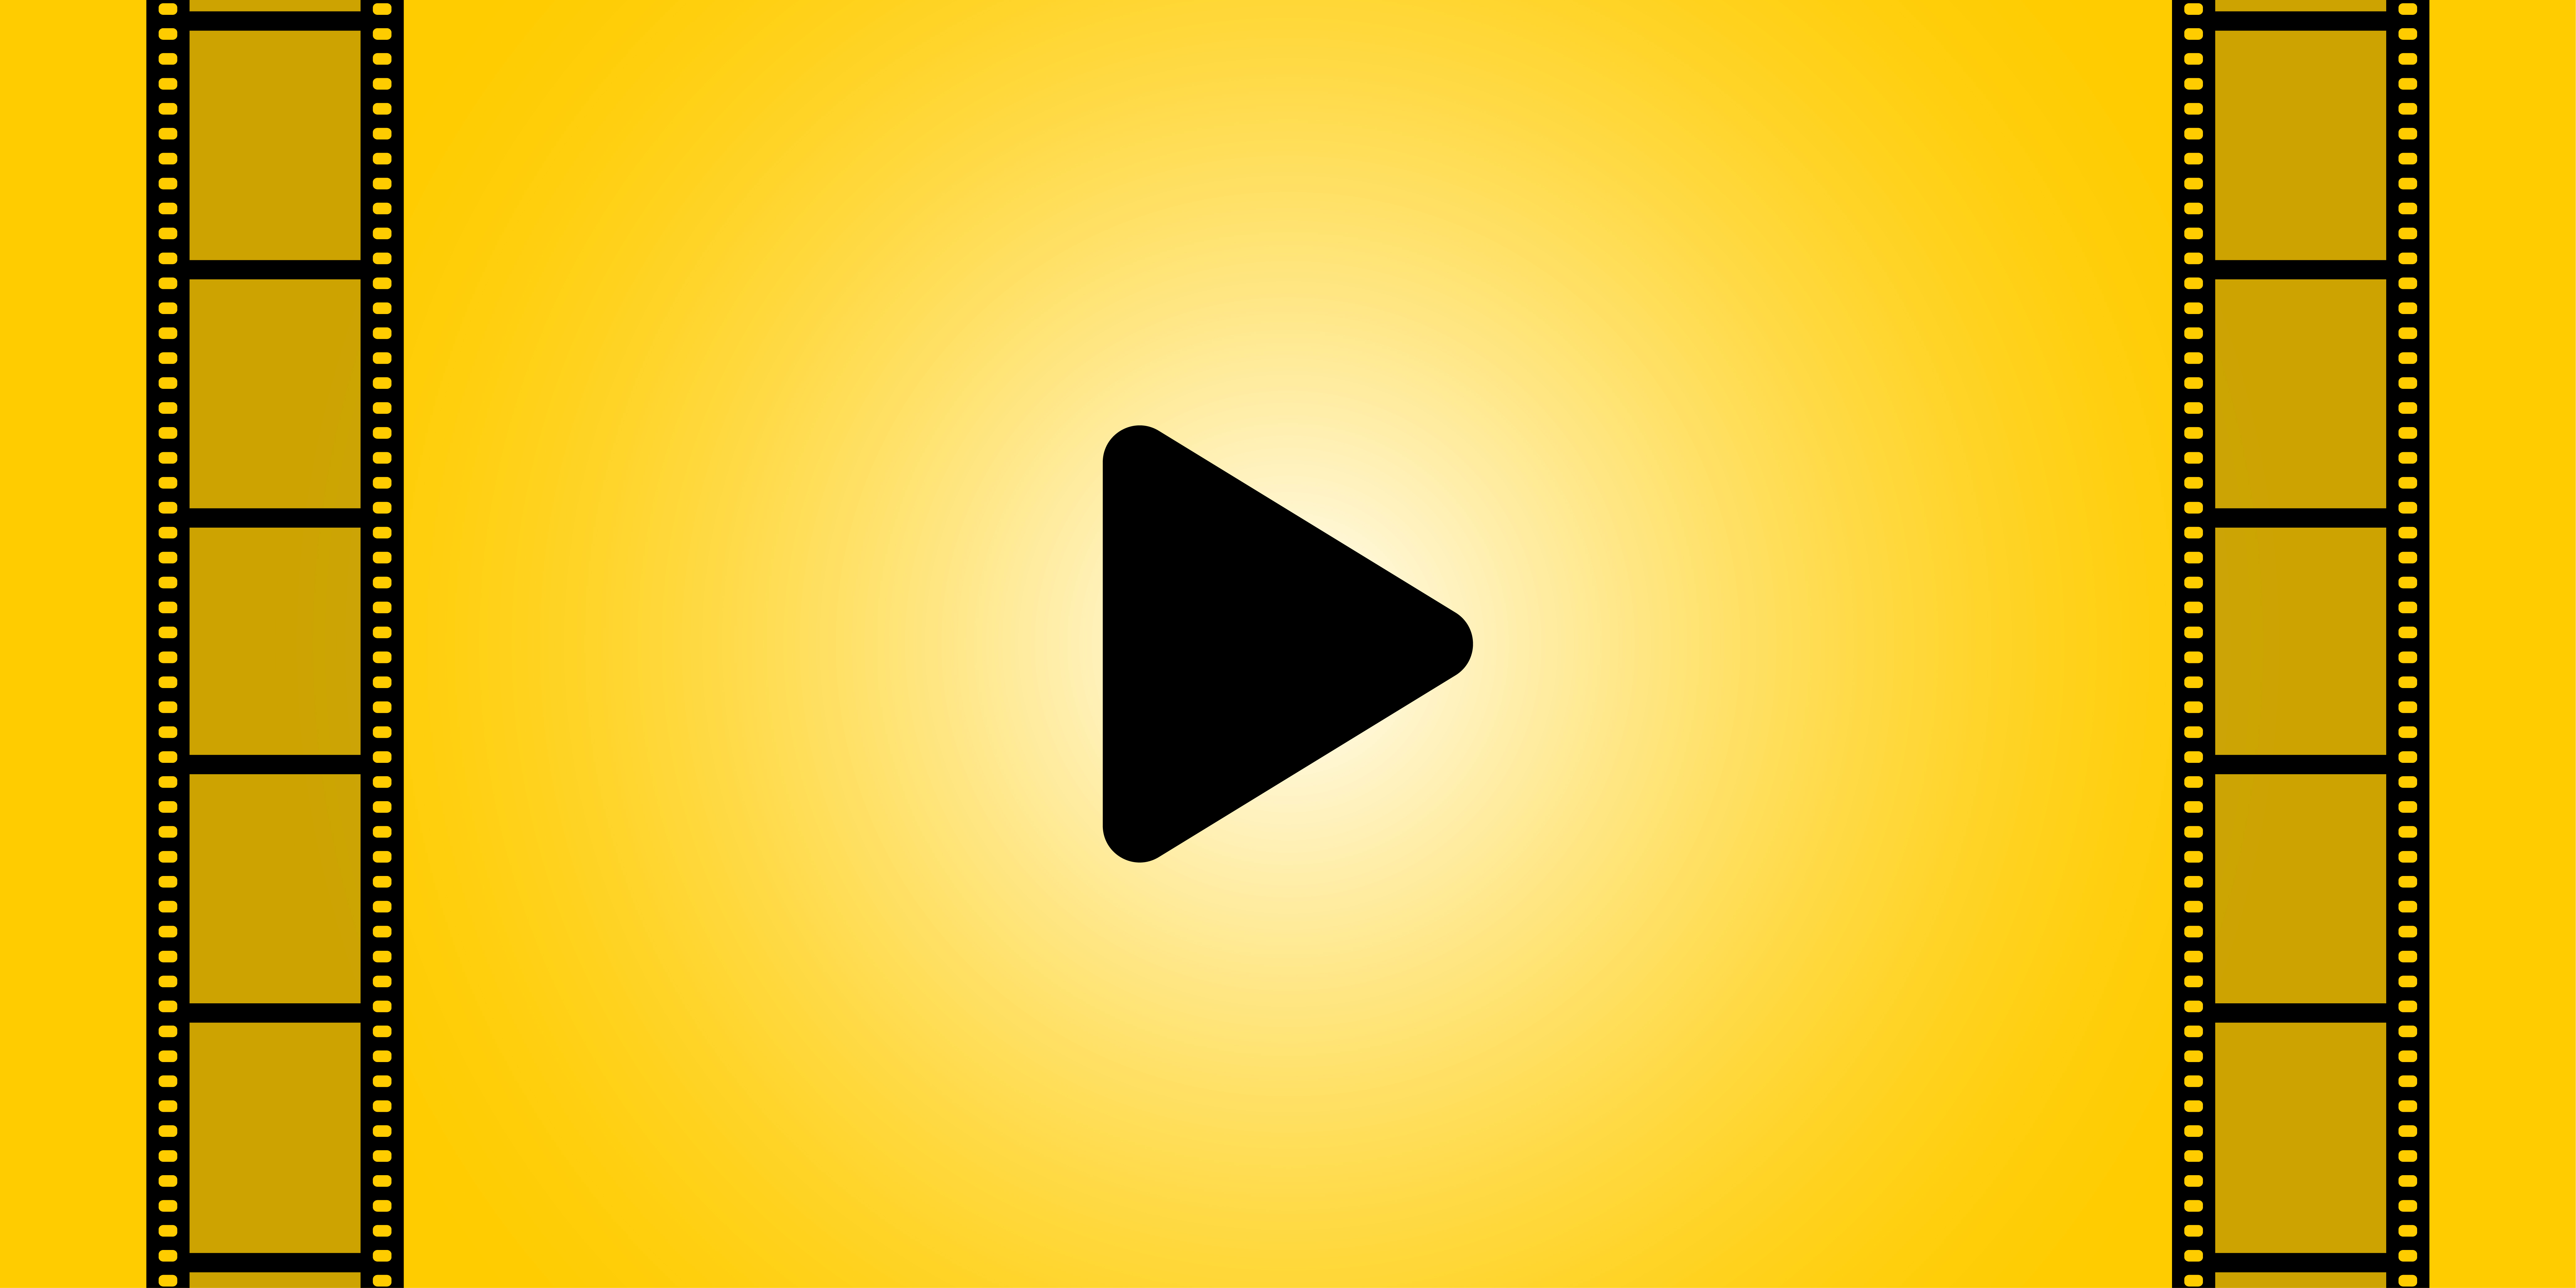 Play button on a gradient yellow background with film strip designs on the left and right side of the frame